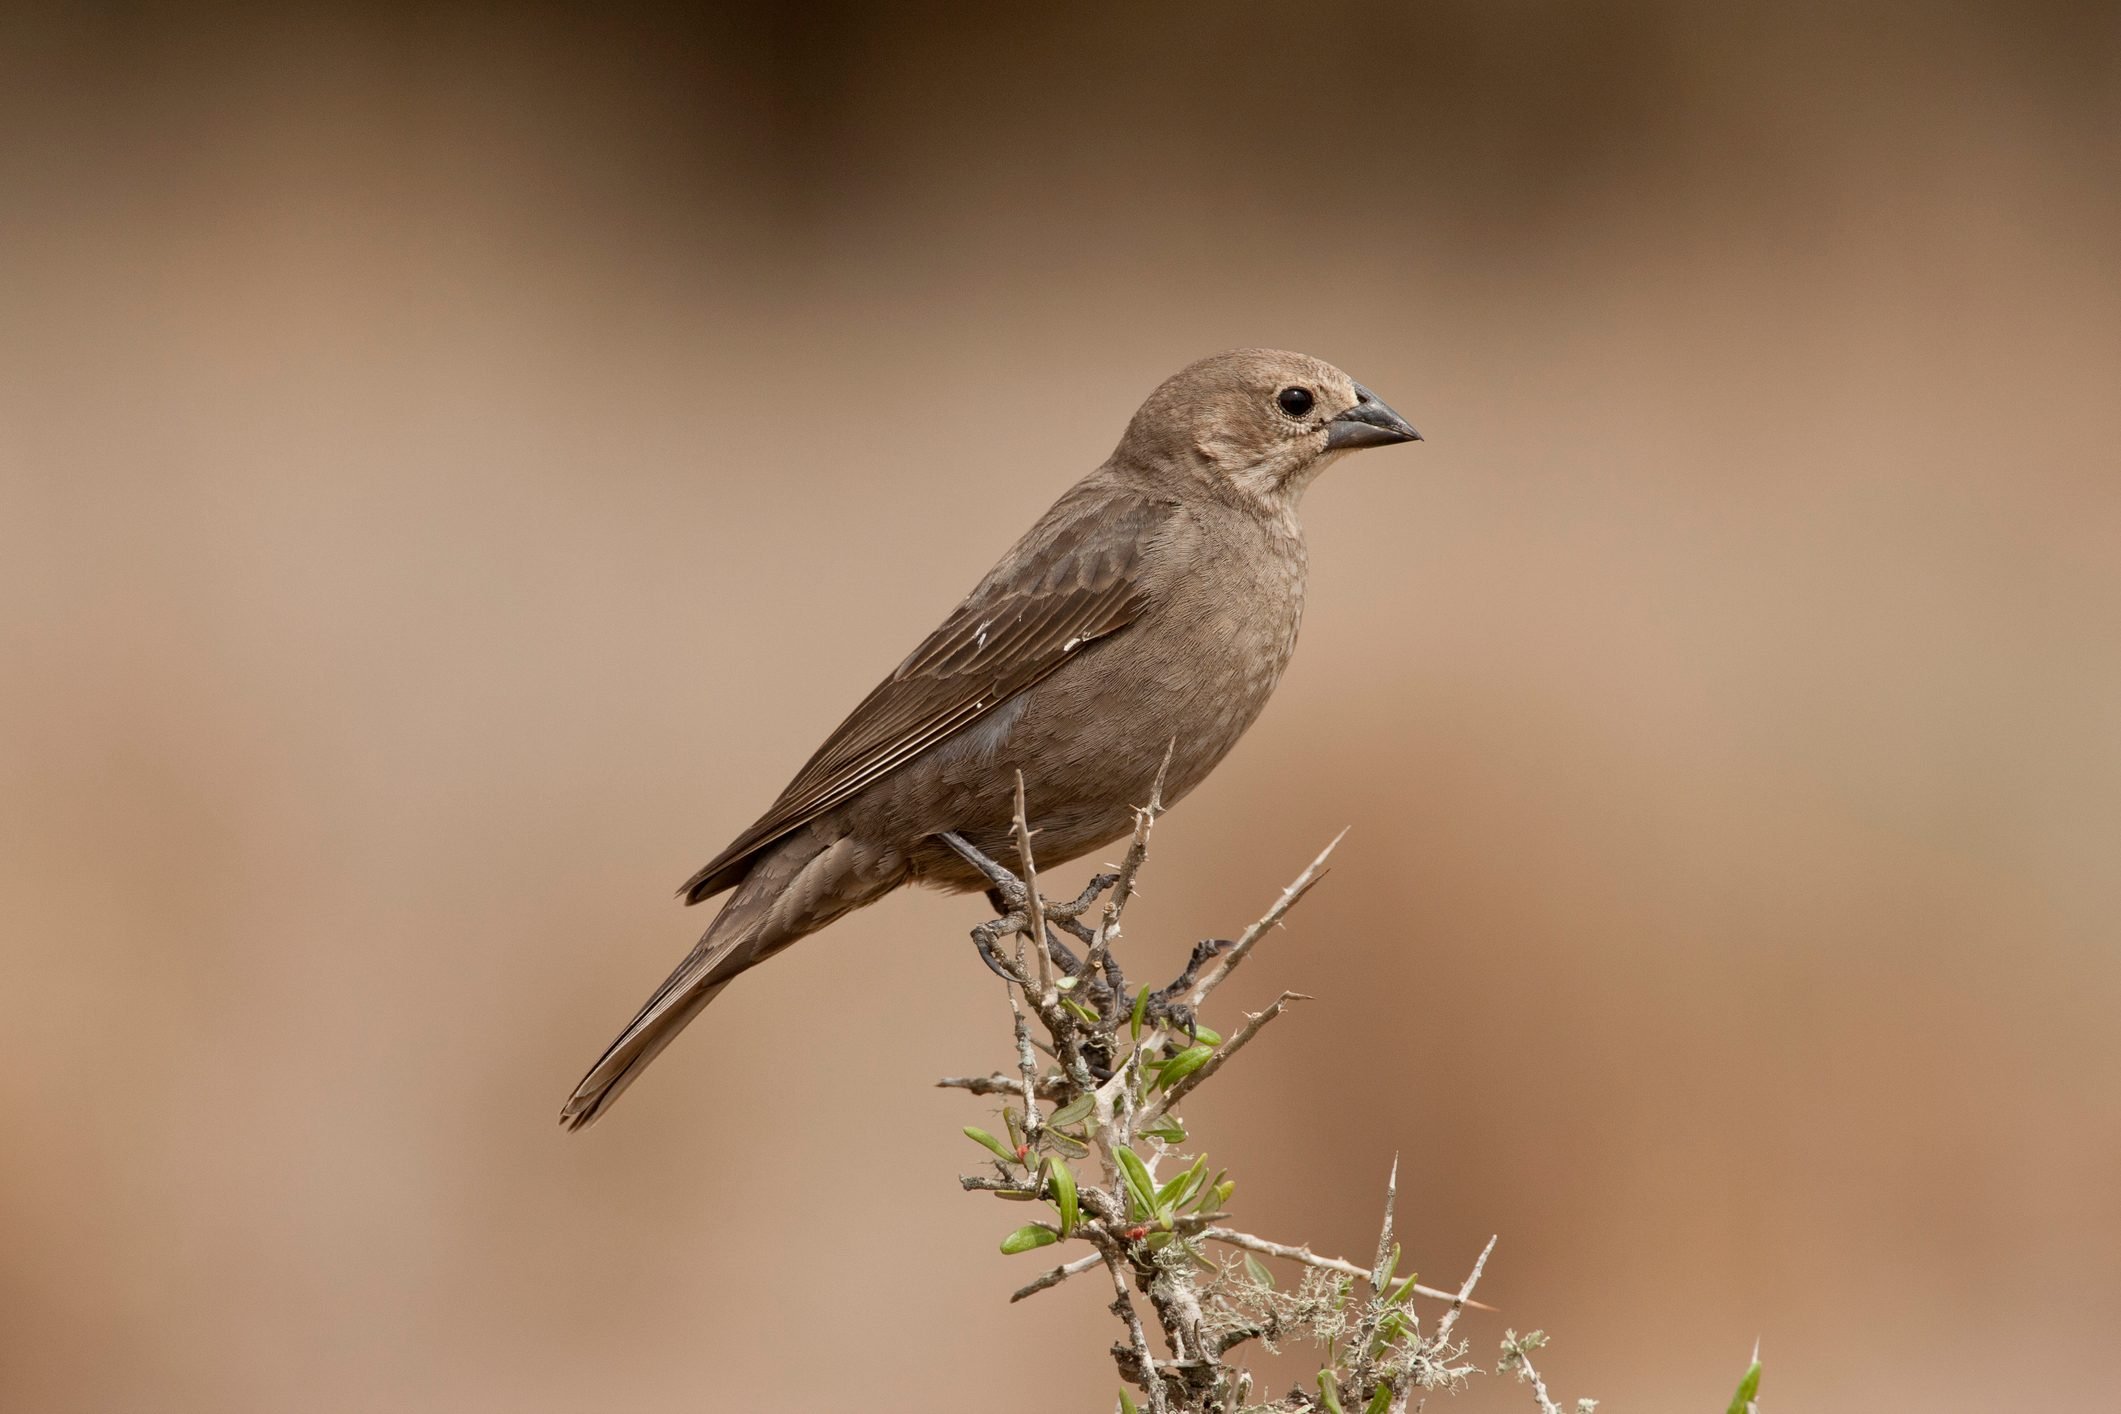 Female Cowbird: Notorious Nest Invaders